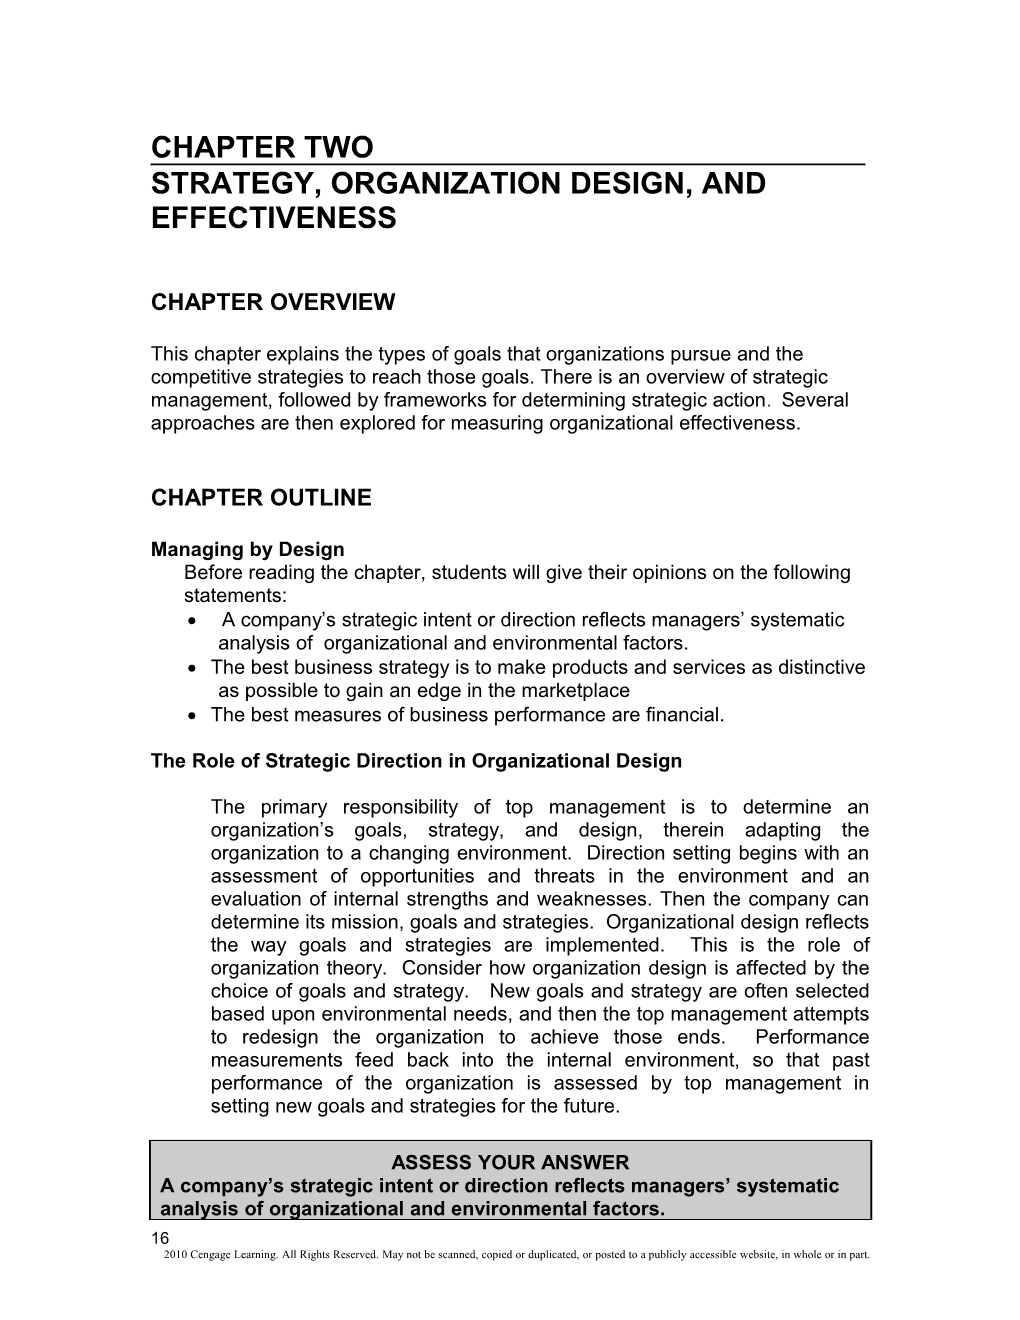 Strategy, Organization Design,And Effectiveness